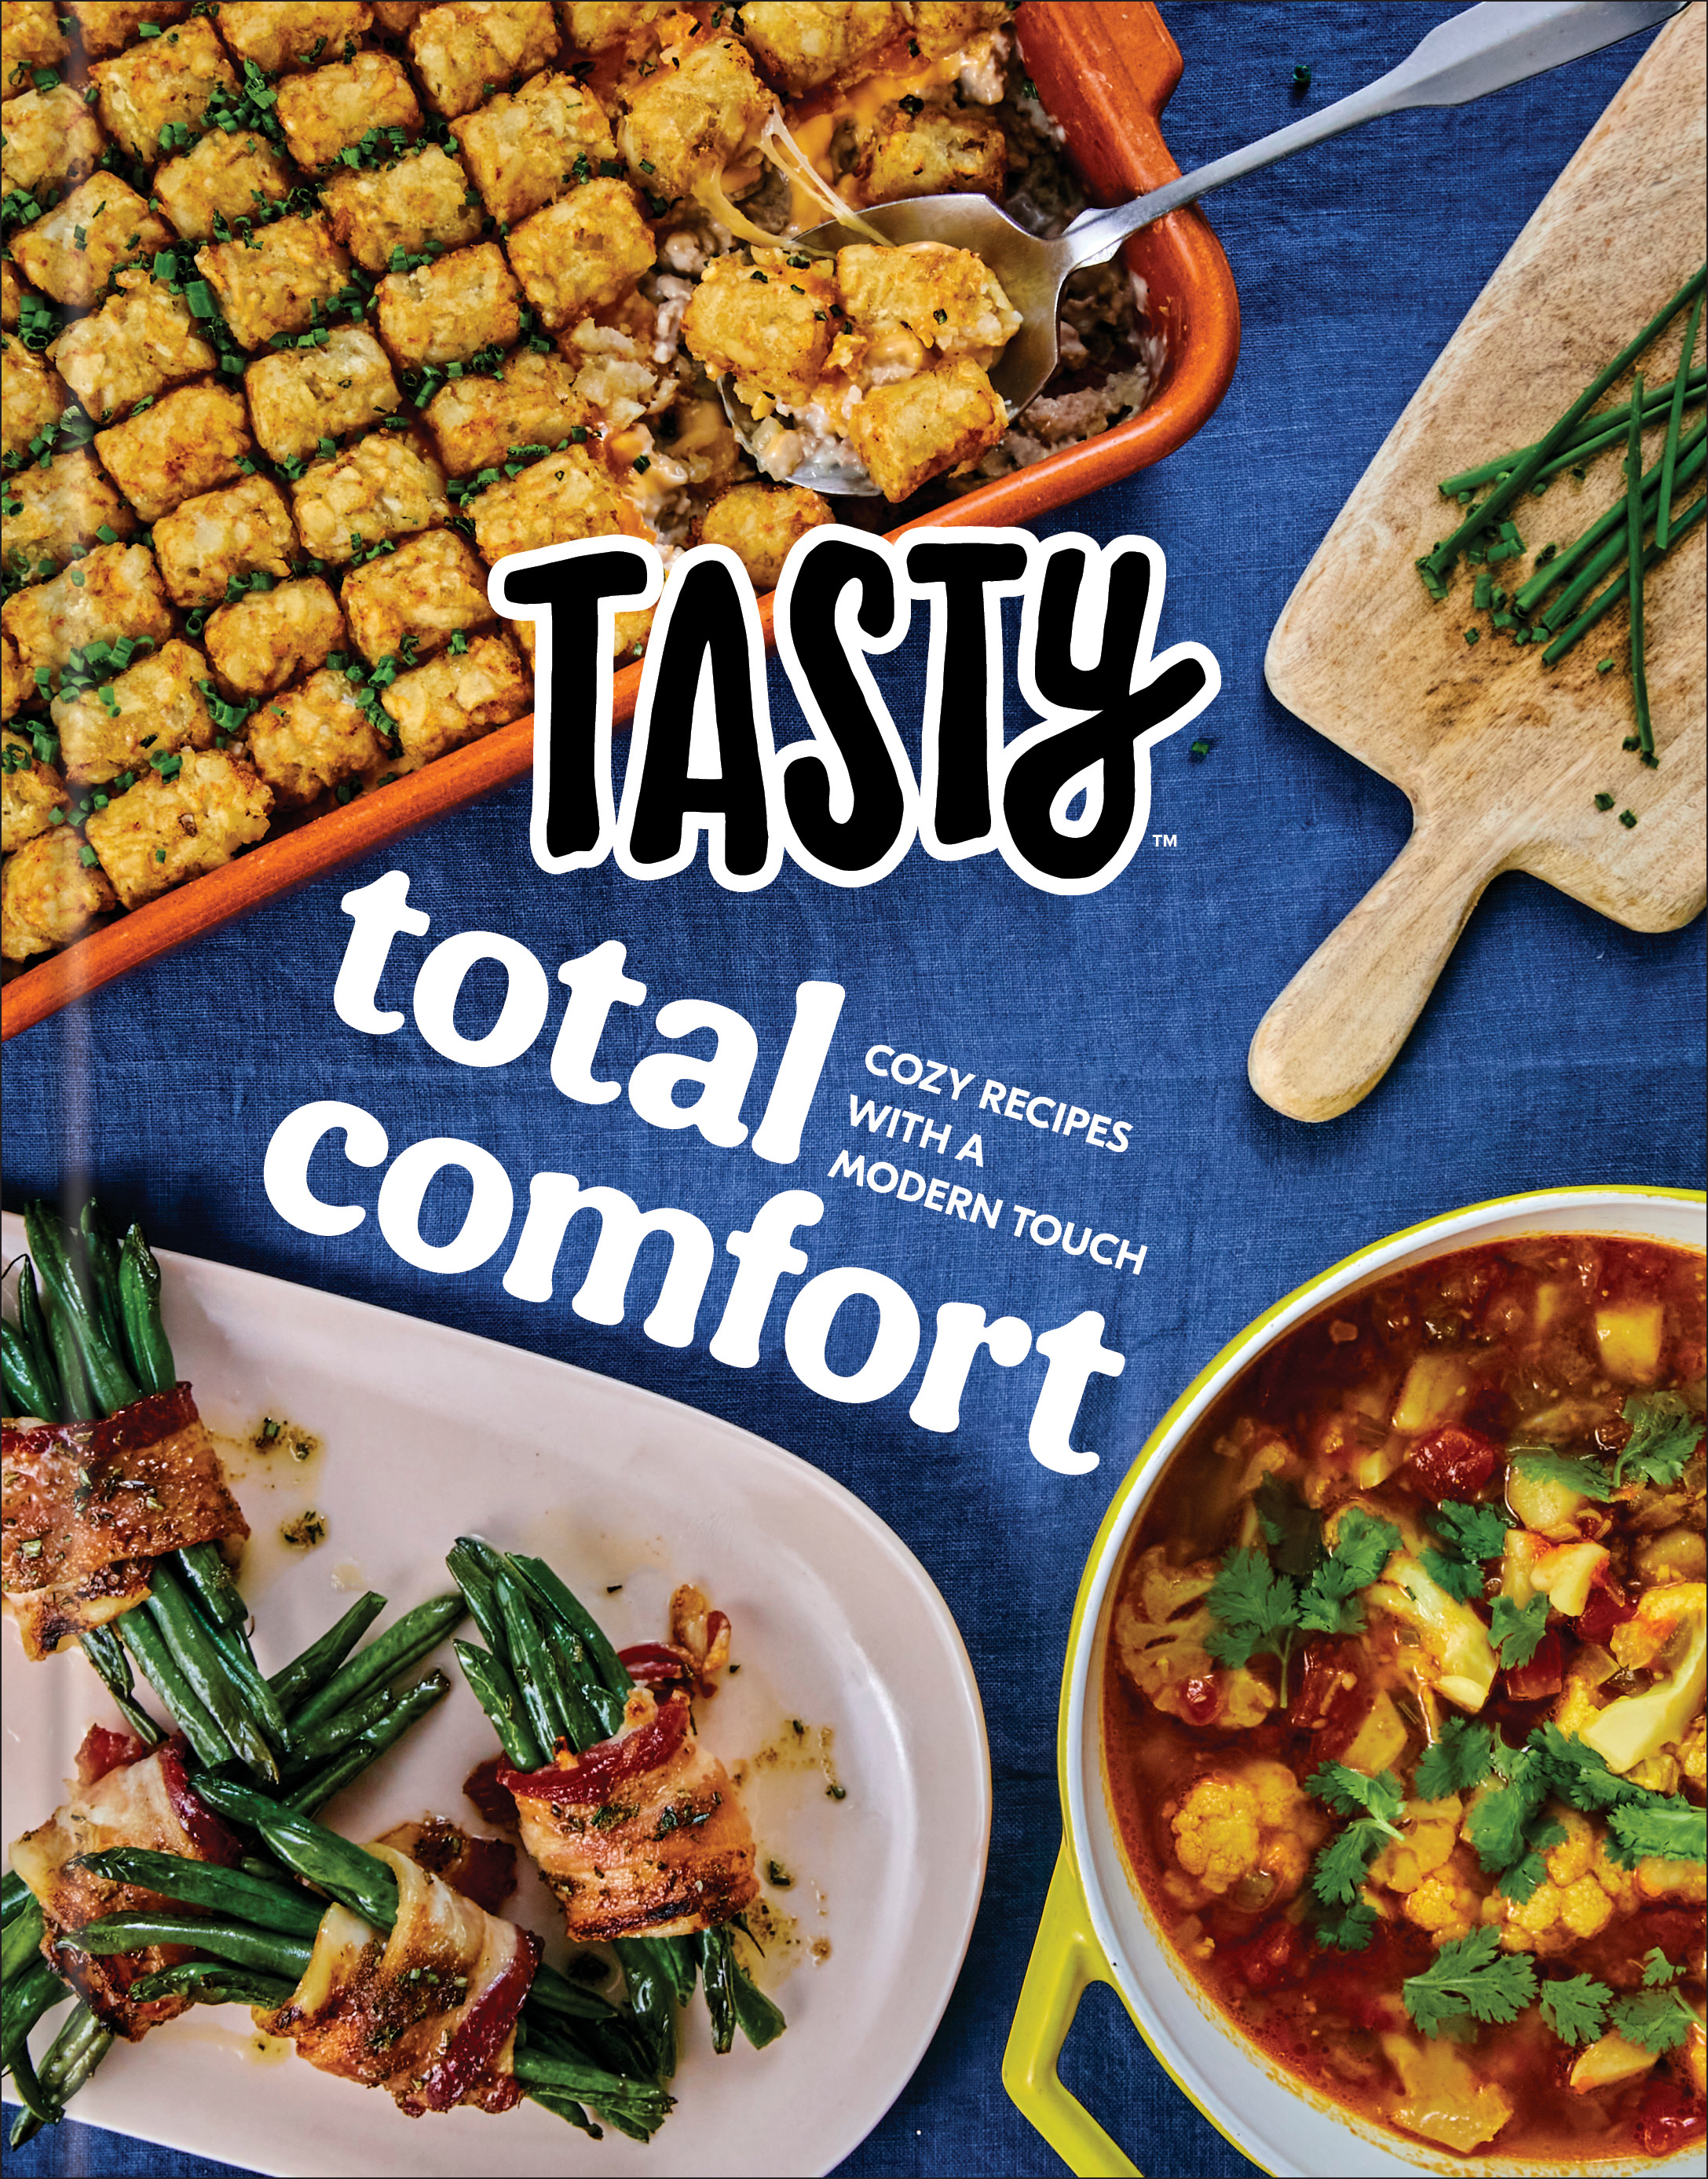 Tasty Total Comfort : Cozy Recipes with a Modern Touch: An Official Tasty Cookbook | Tasty